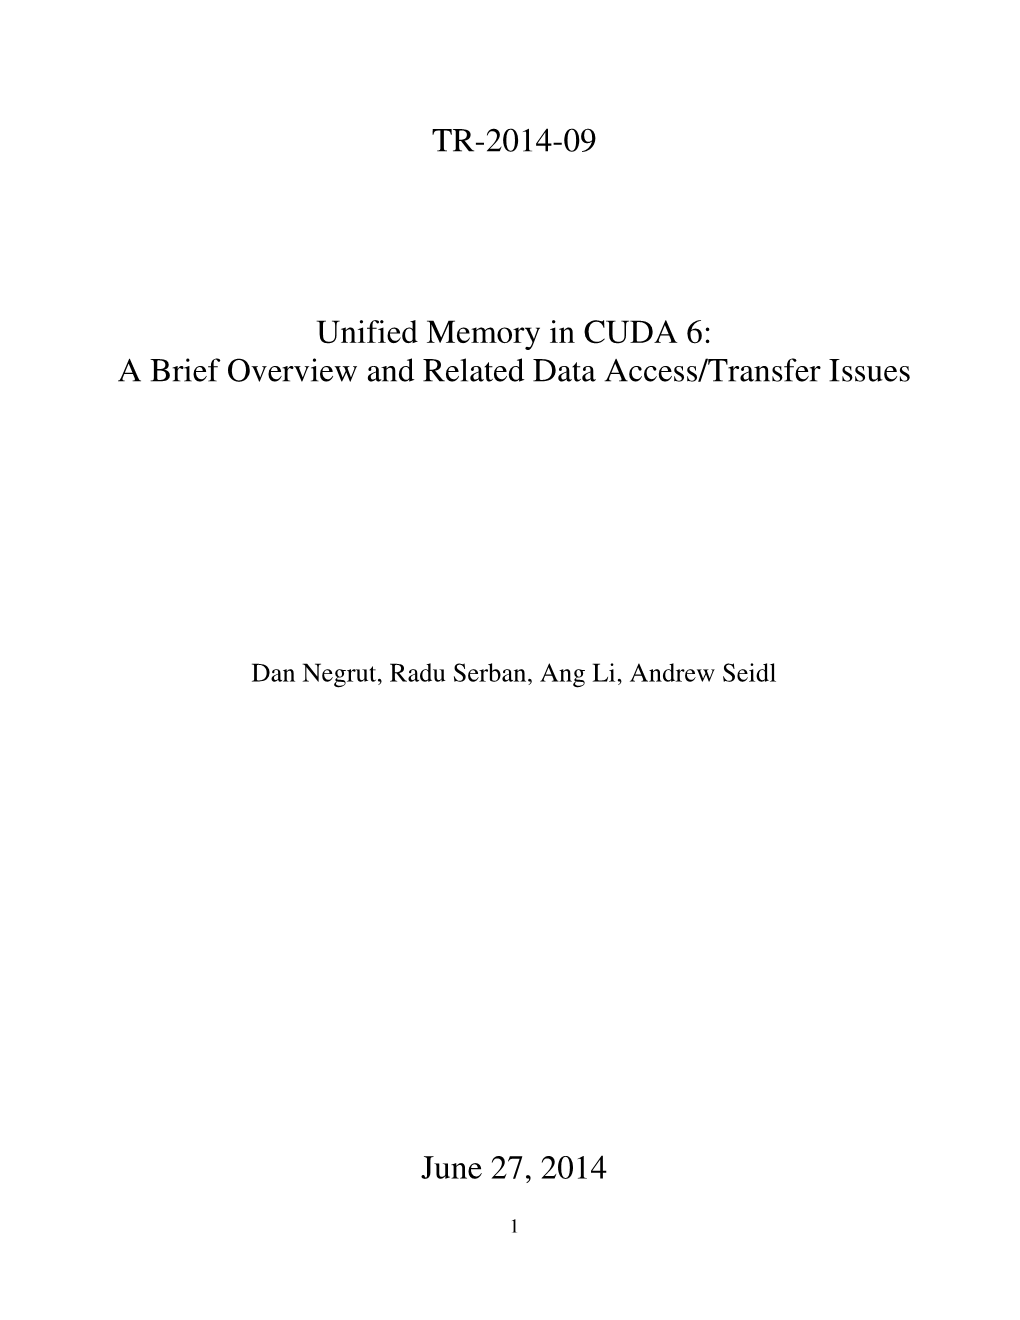 Unified Memory in CUDA 6: a Brief Overview and Related Data Access/Transfer Issues